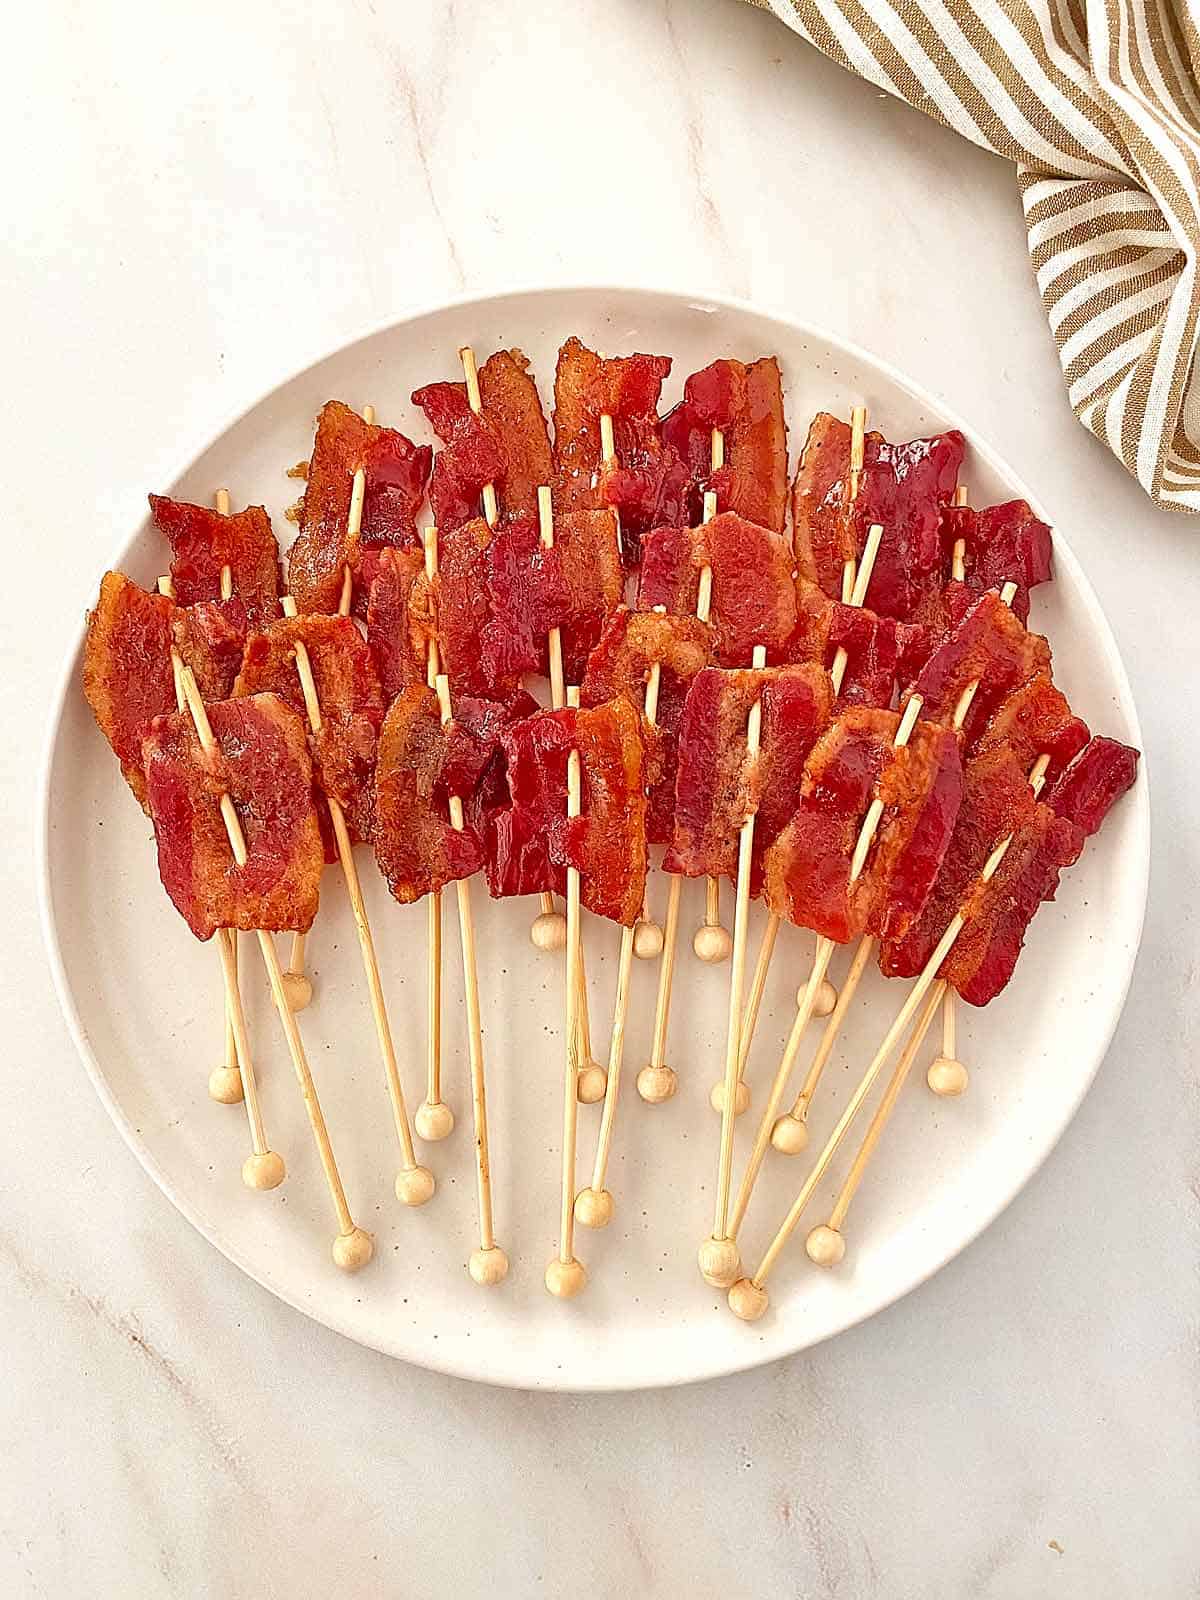 A serving plate with 24 bacon lollipops appetizers on wooden sticks.